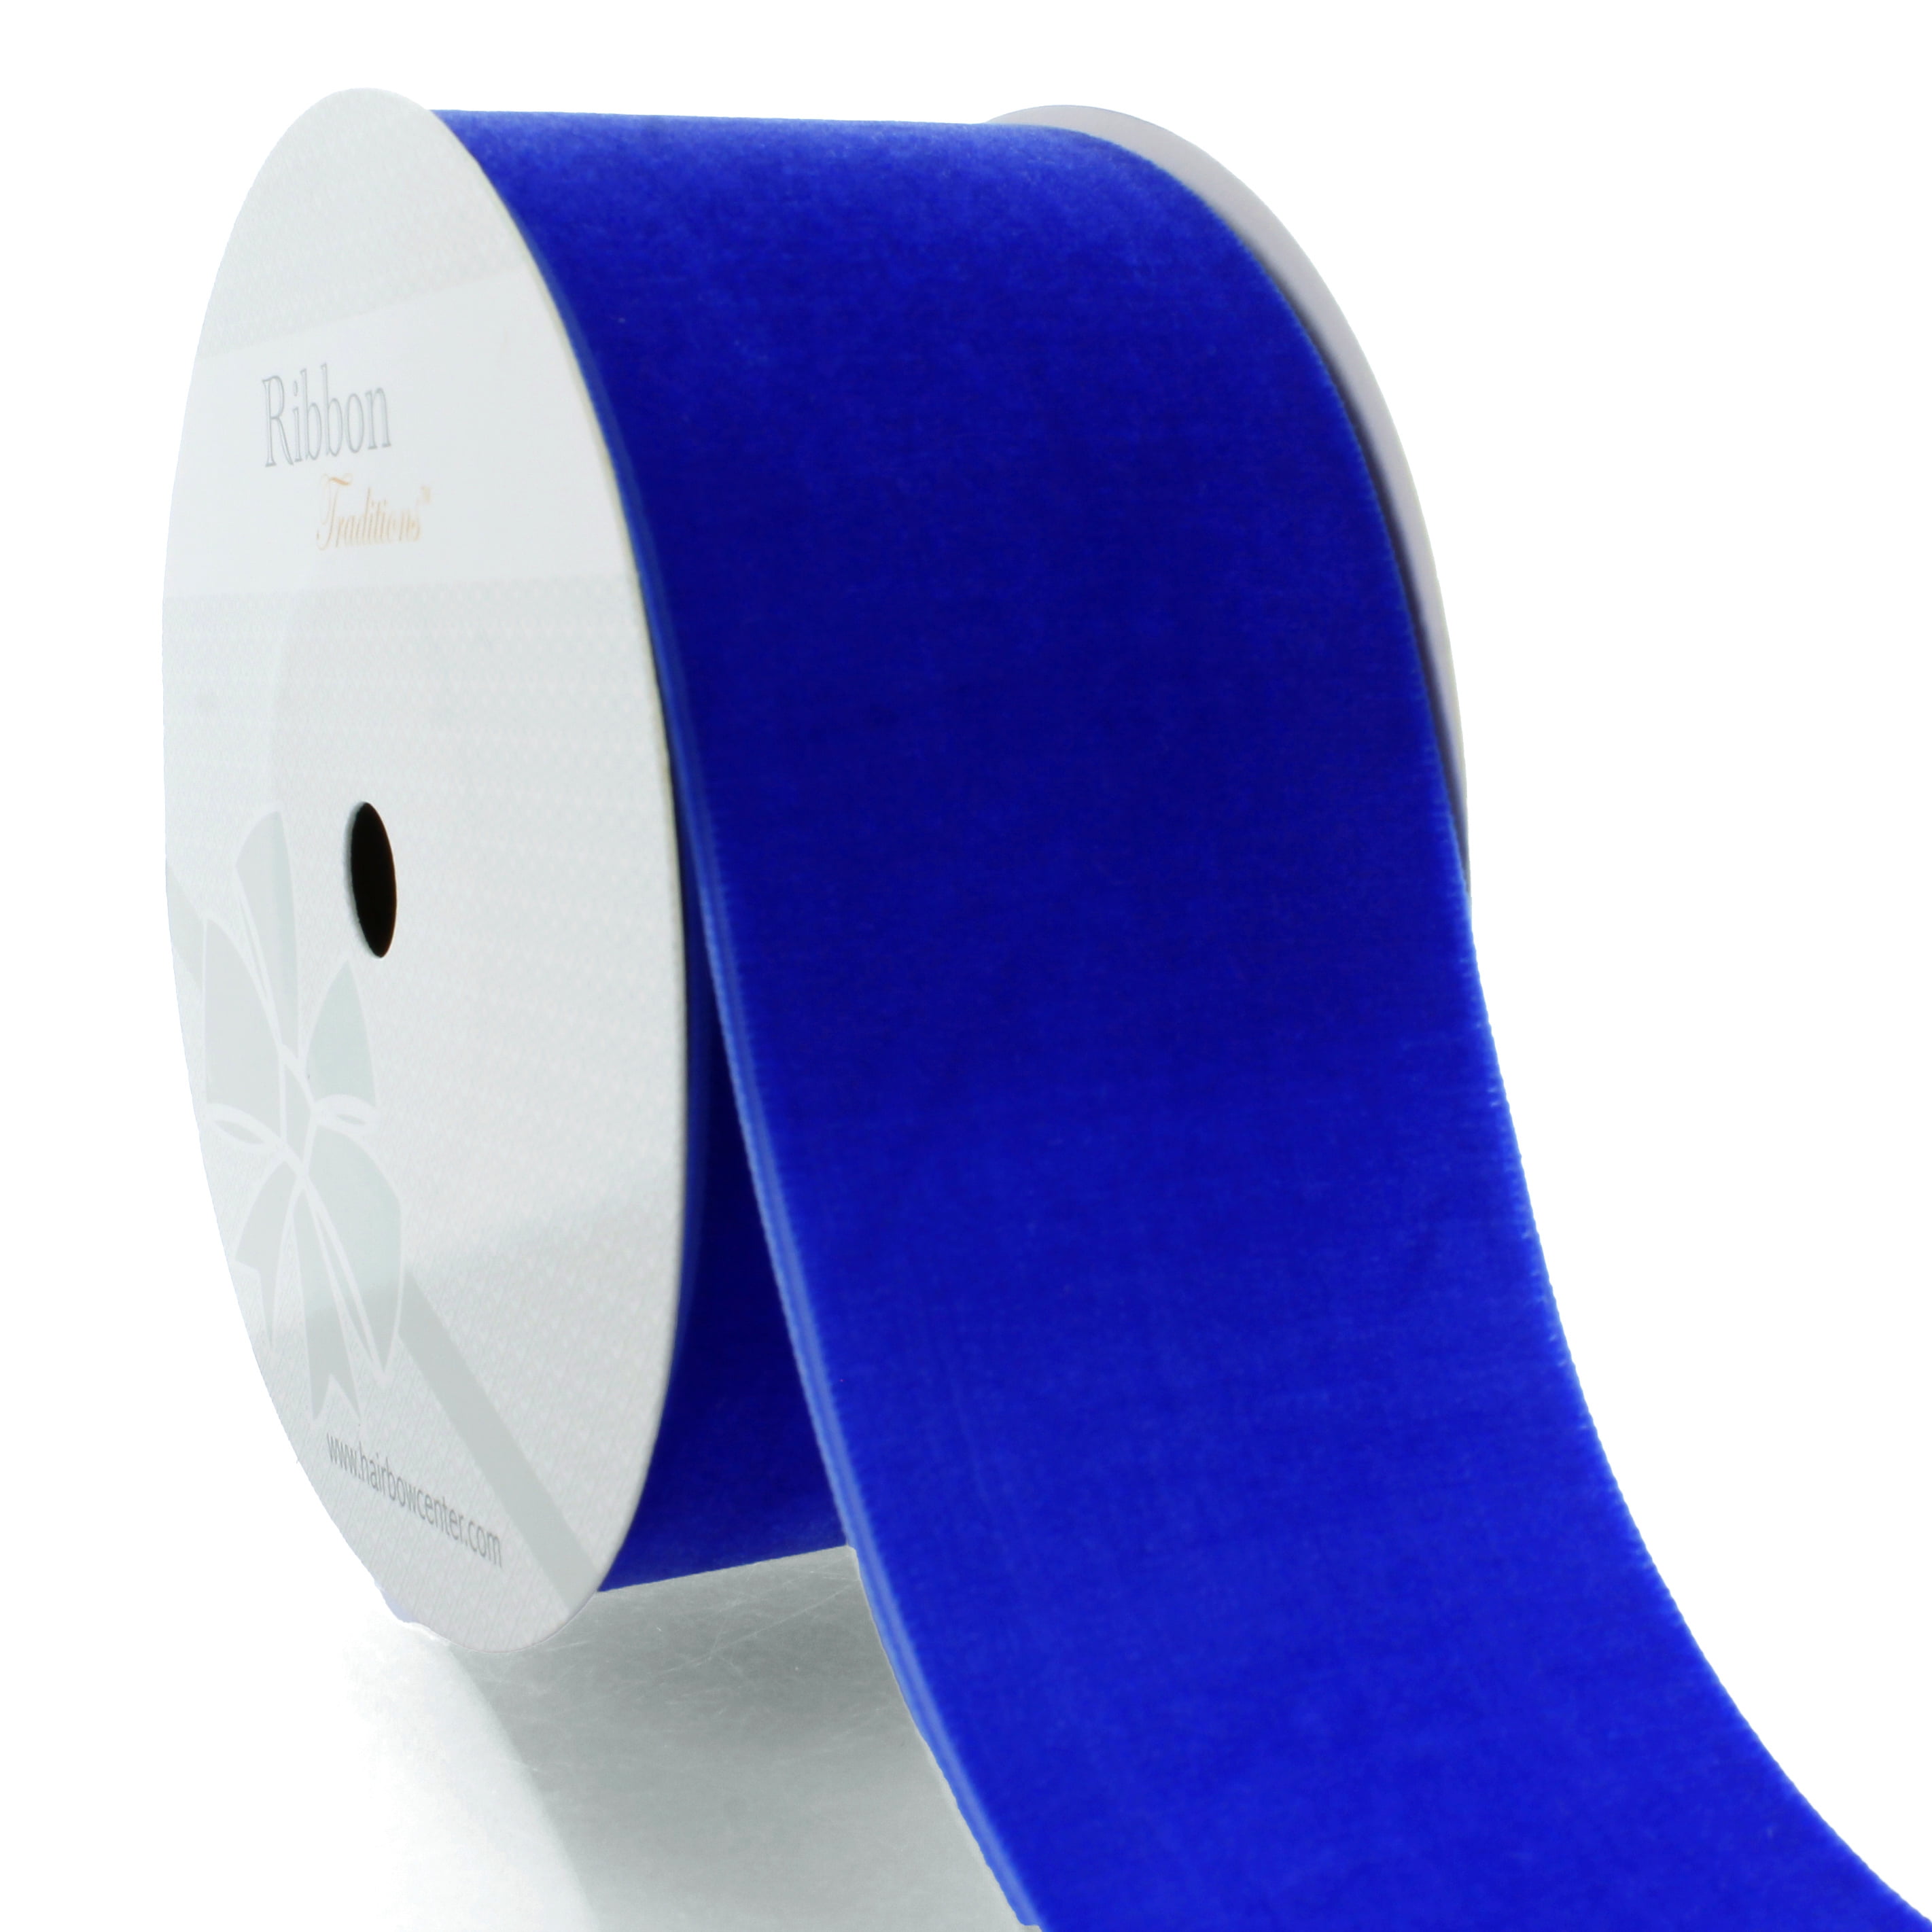 1 1/2 2 Inch Large Velvet Ribbon for Wrapping 38 Mm 50 Mm 30 Colors -   Finland